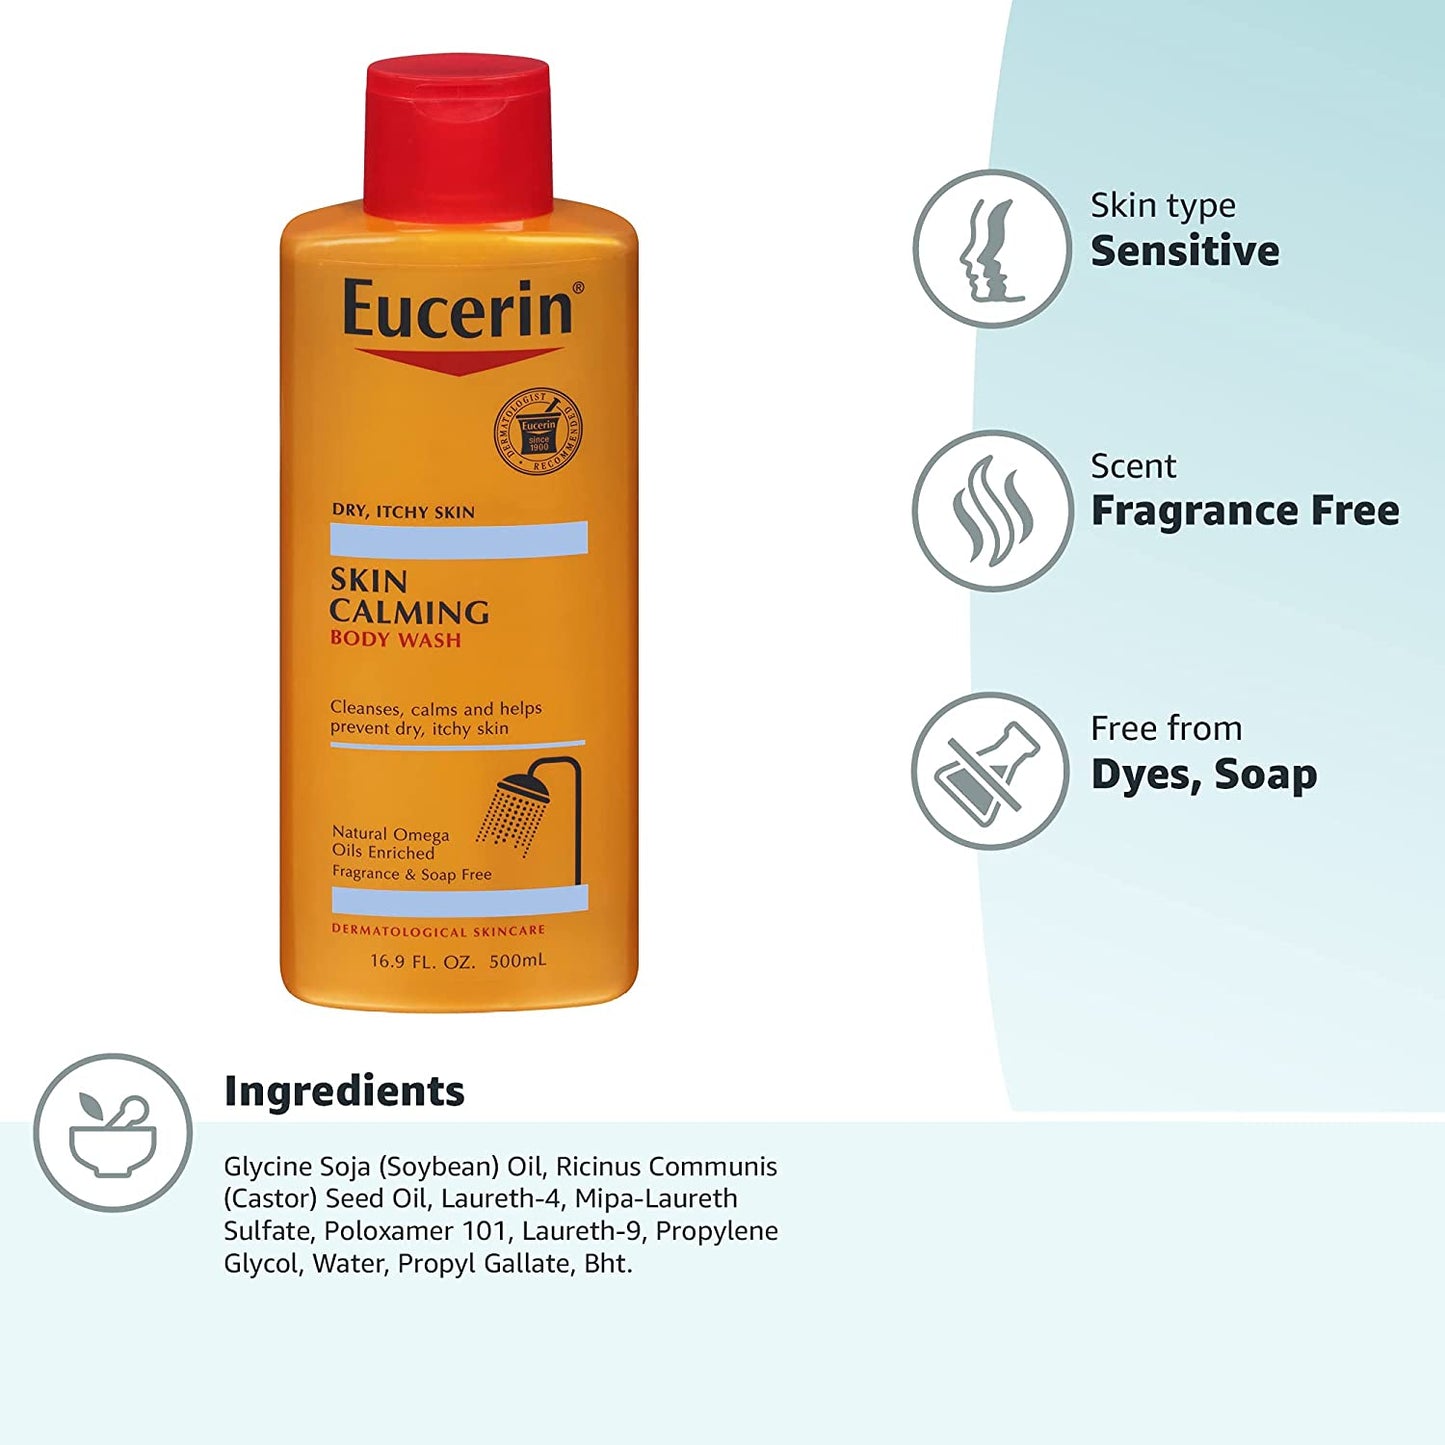 Eucerin Skin Calming Body Wash Enriched with Natural Omega Cleanses & Calms Dry, Itchy Skin, 16.9 fl.oz / 500ml